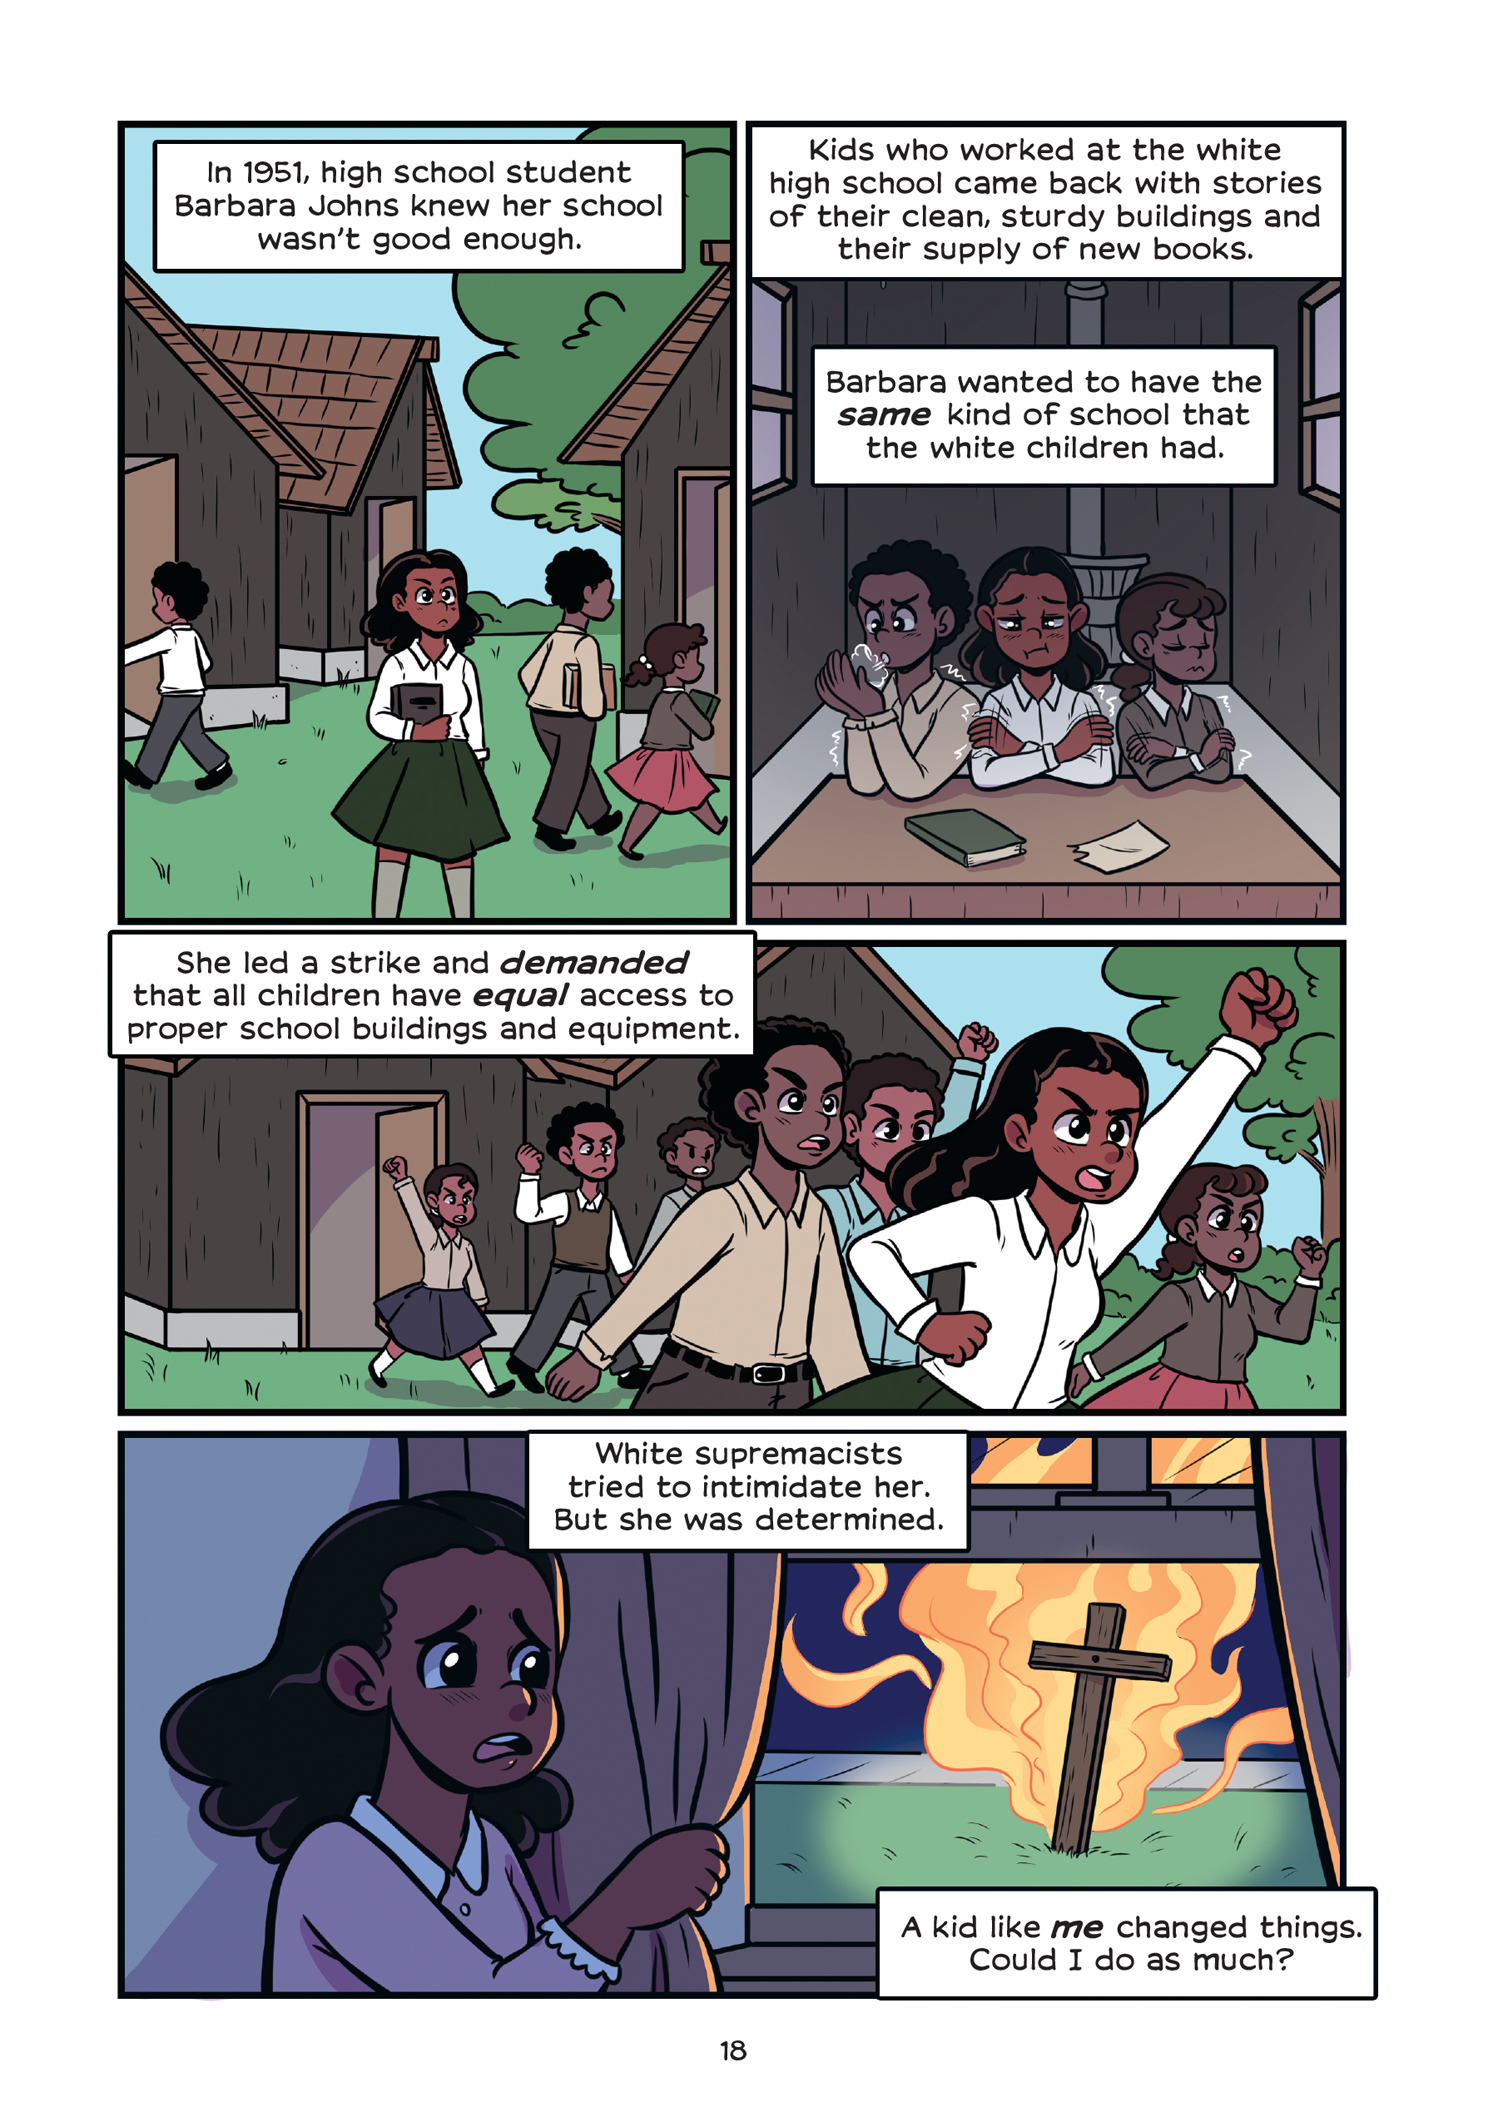 Read online History Comics comic -  Issue # Rosa Parks & Claudette Colvin - Civil Rights Heroes - 24